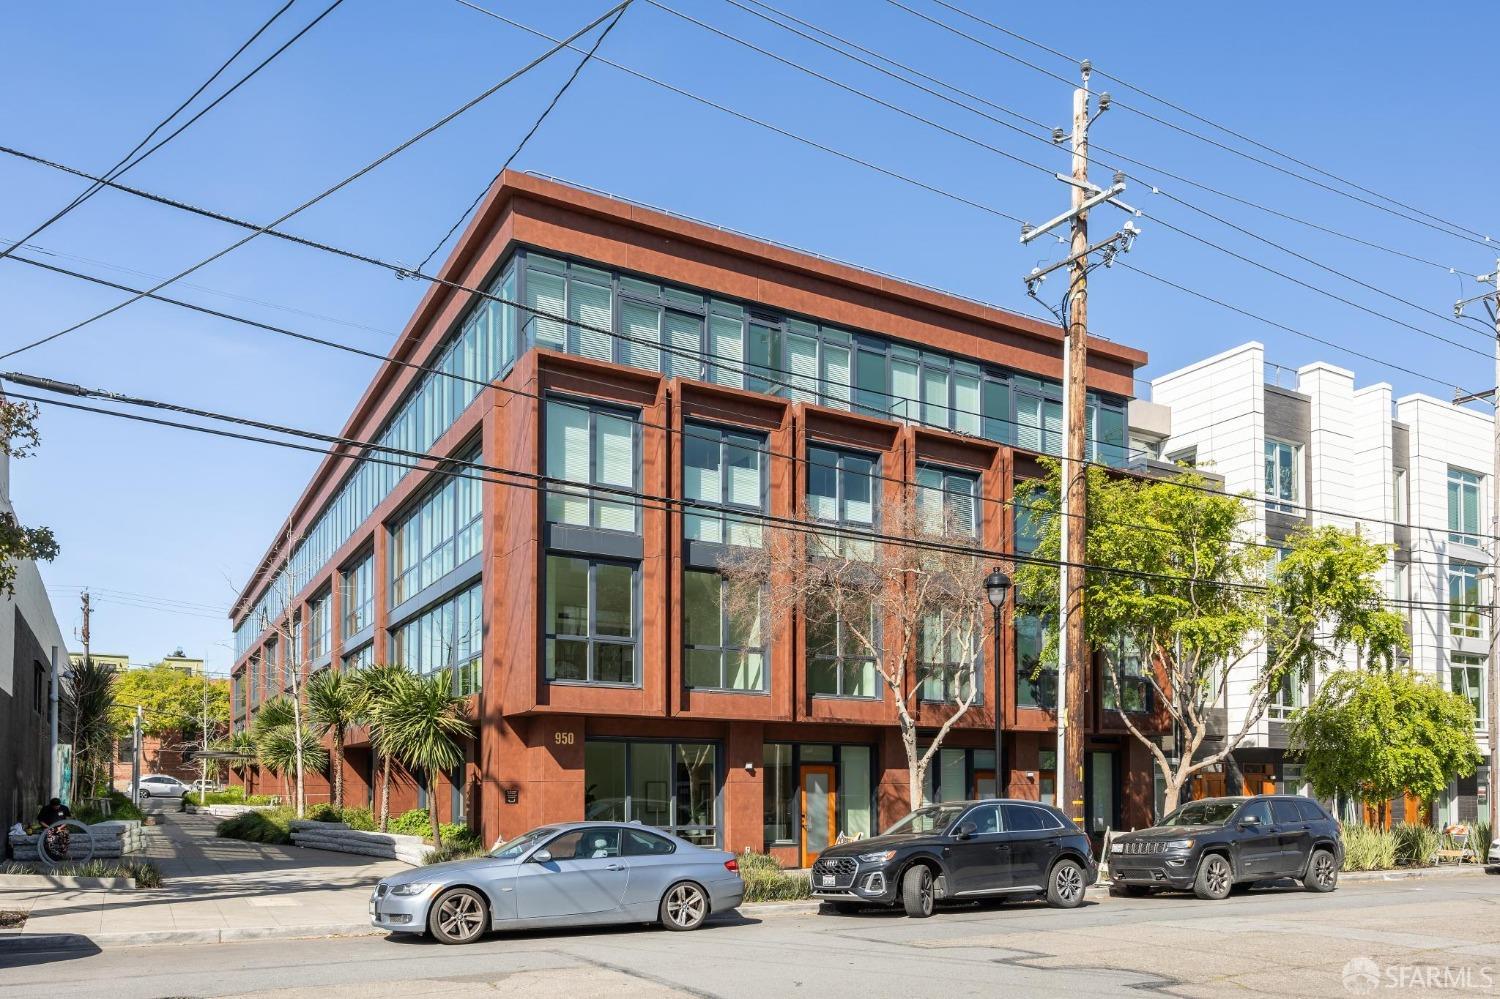 950 Tennessee is a quiet location in the heart of Dogpatch